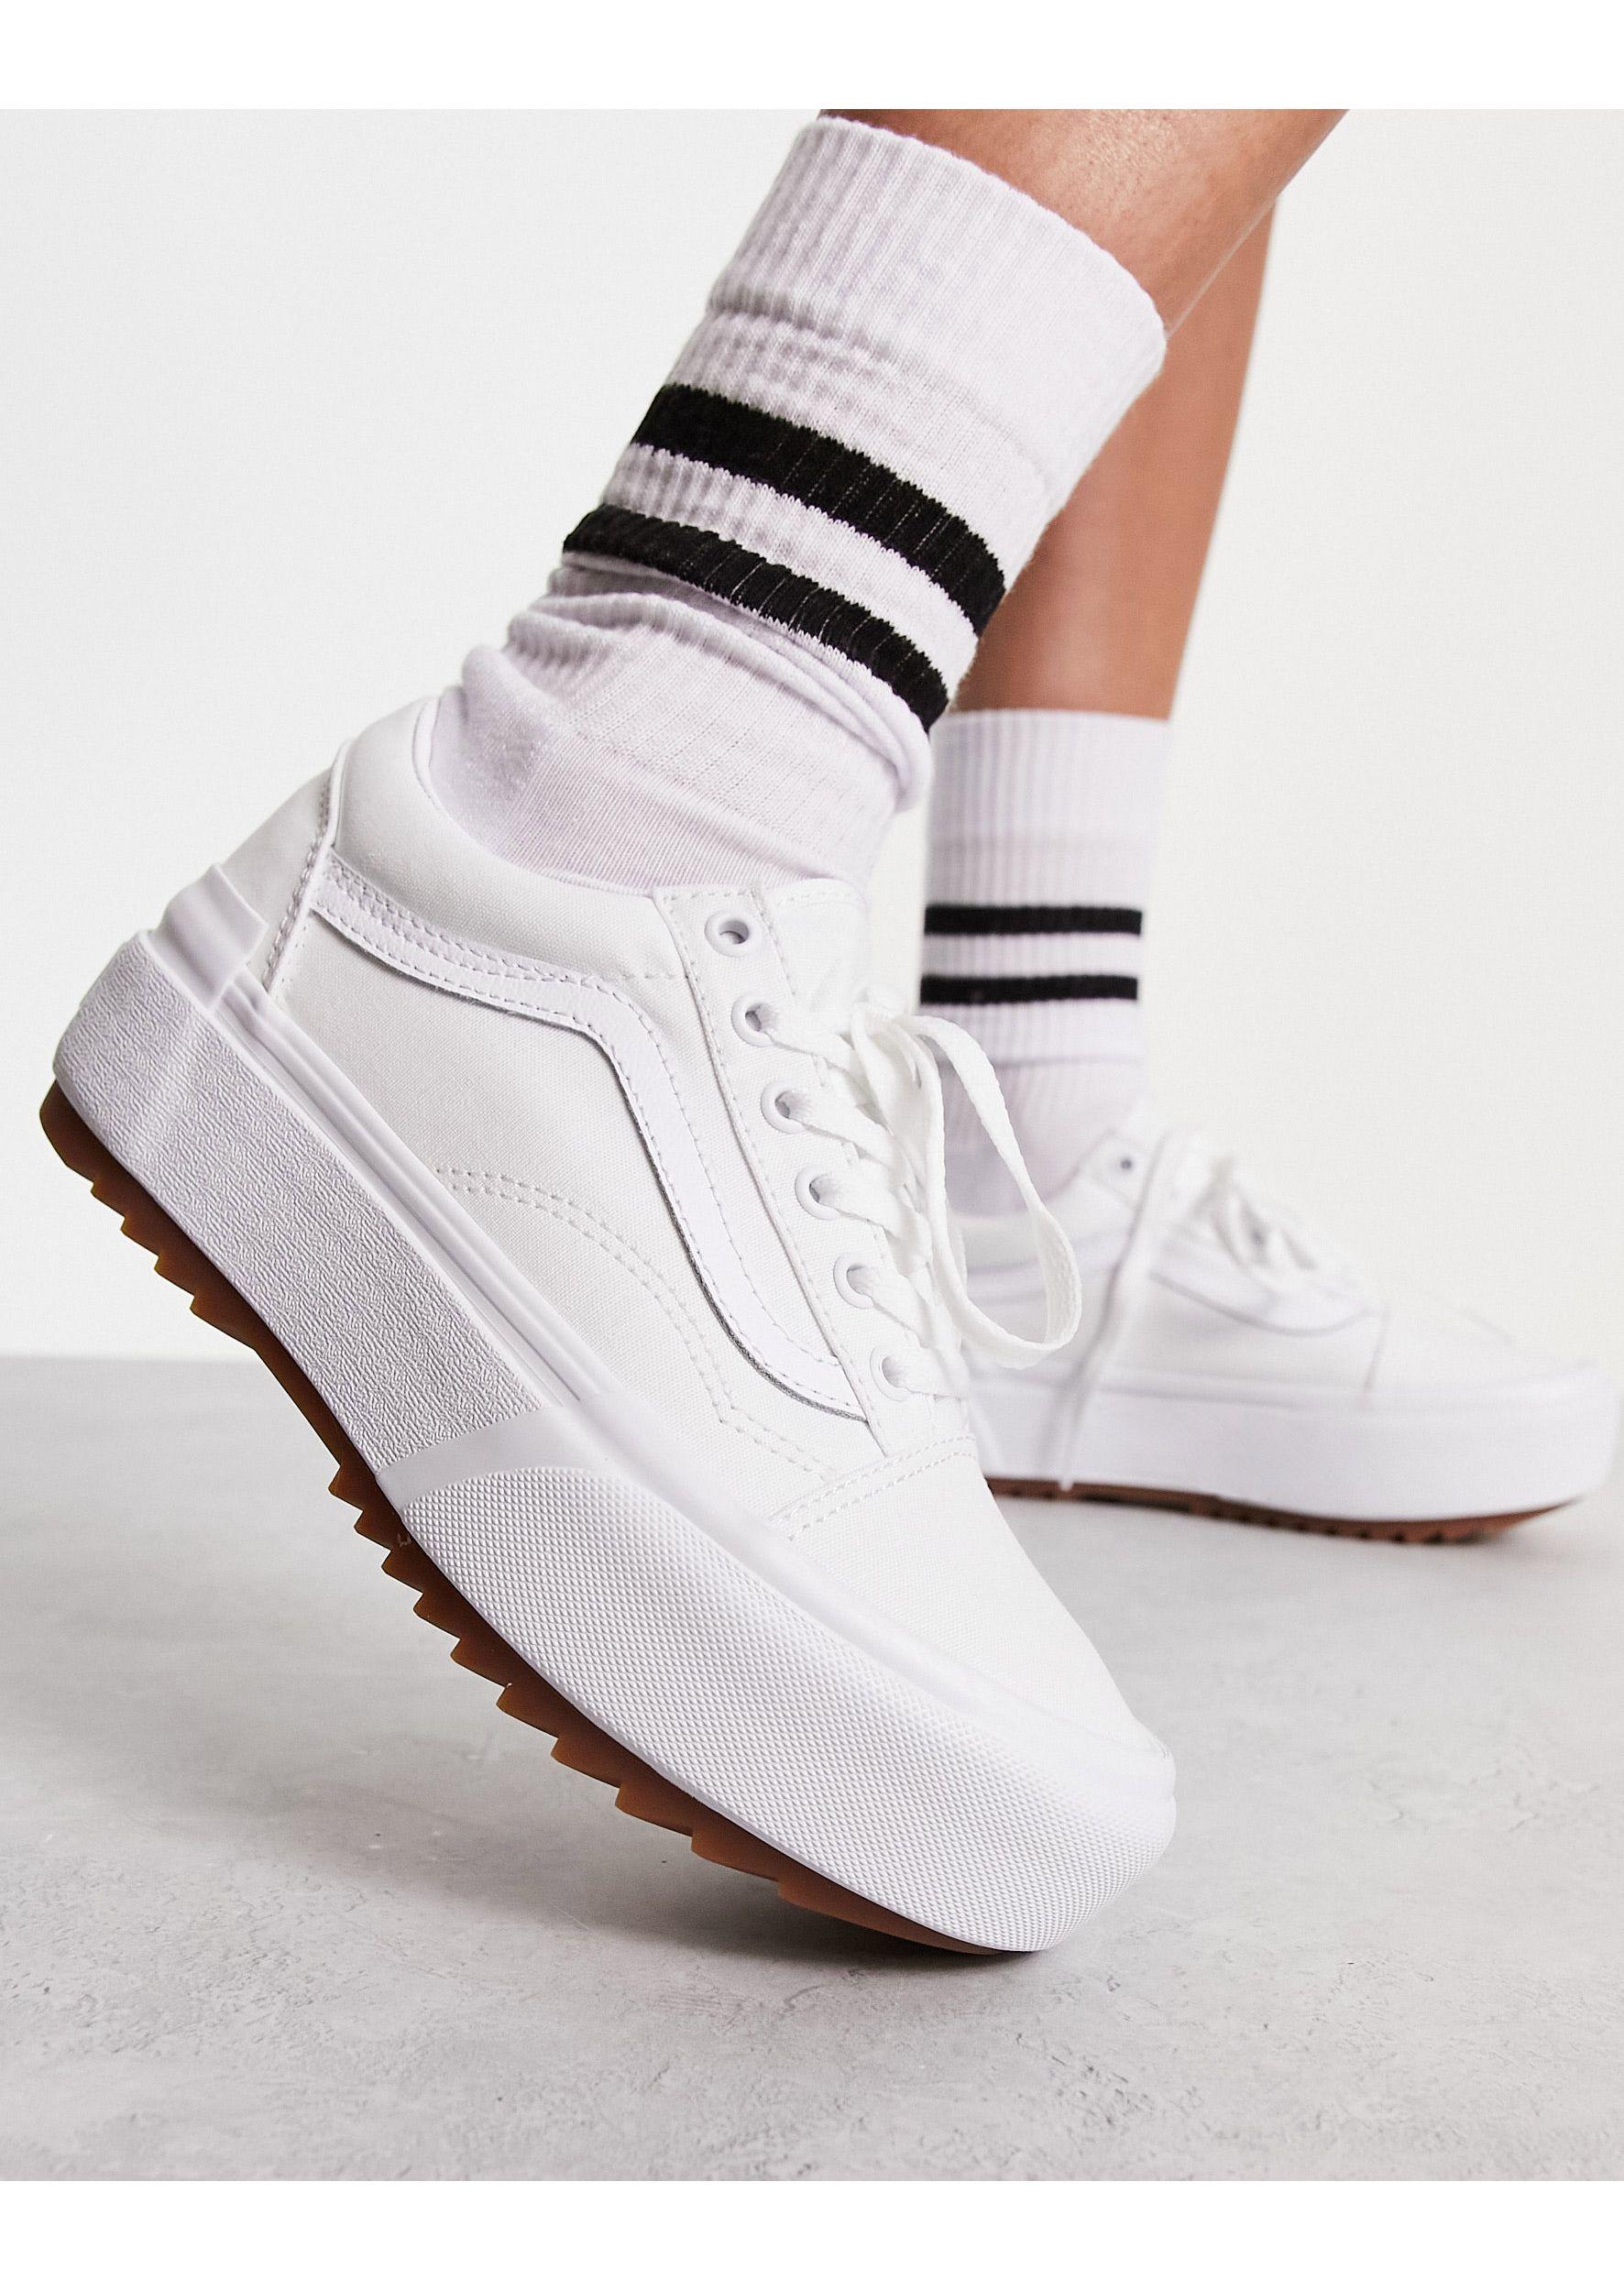 Designer Bullet Ozweego Shoes For Men And Women Super Thick And High Sole  In Black And White Color, Fashionable Trendy Sneakers By Top Brand From  Super_supplier88, $44.31 | DHgate.Com